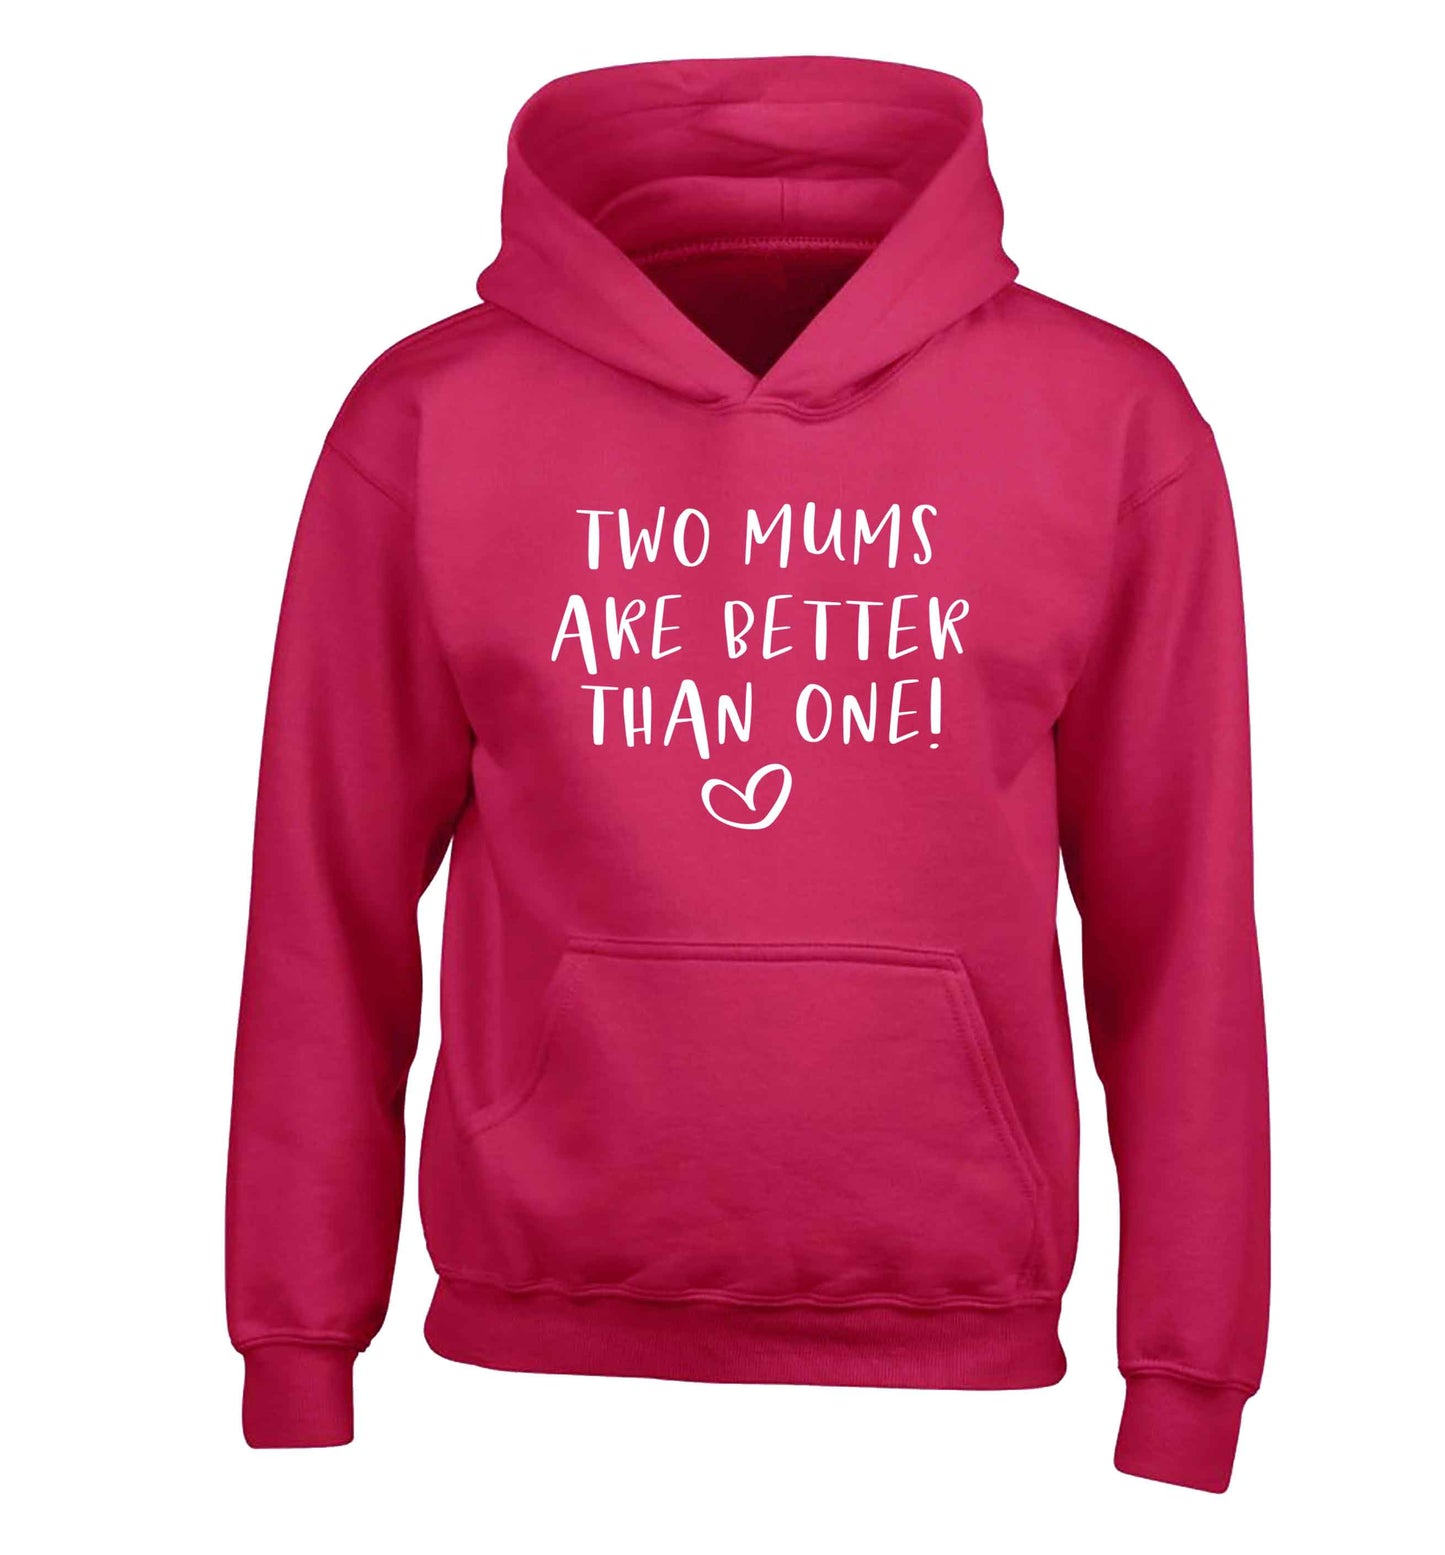 Two mums are better than one children's pink hoodie 12-13 Years